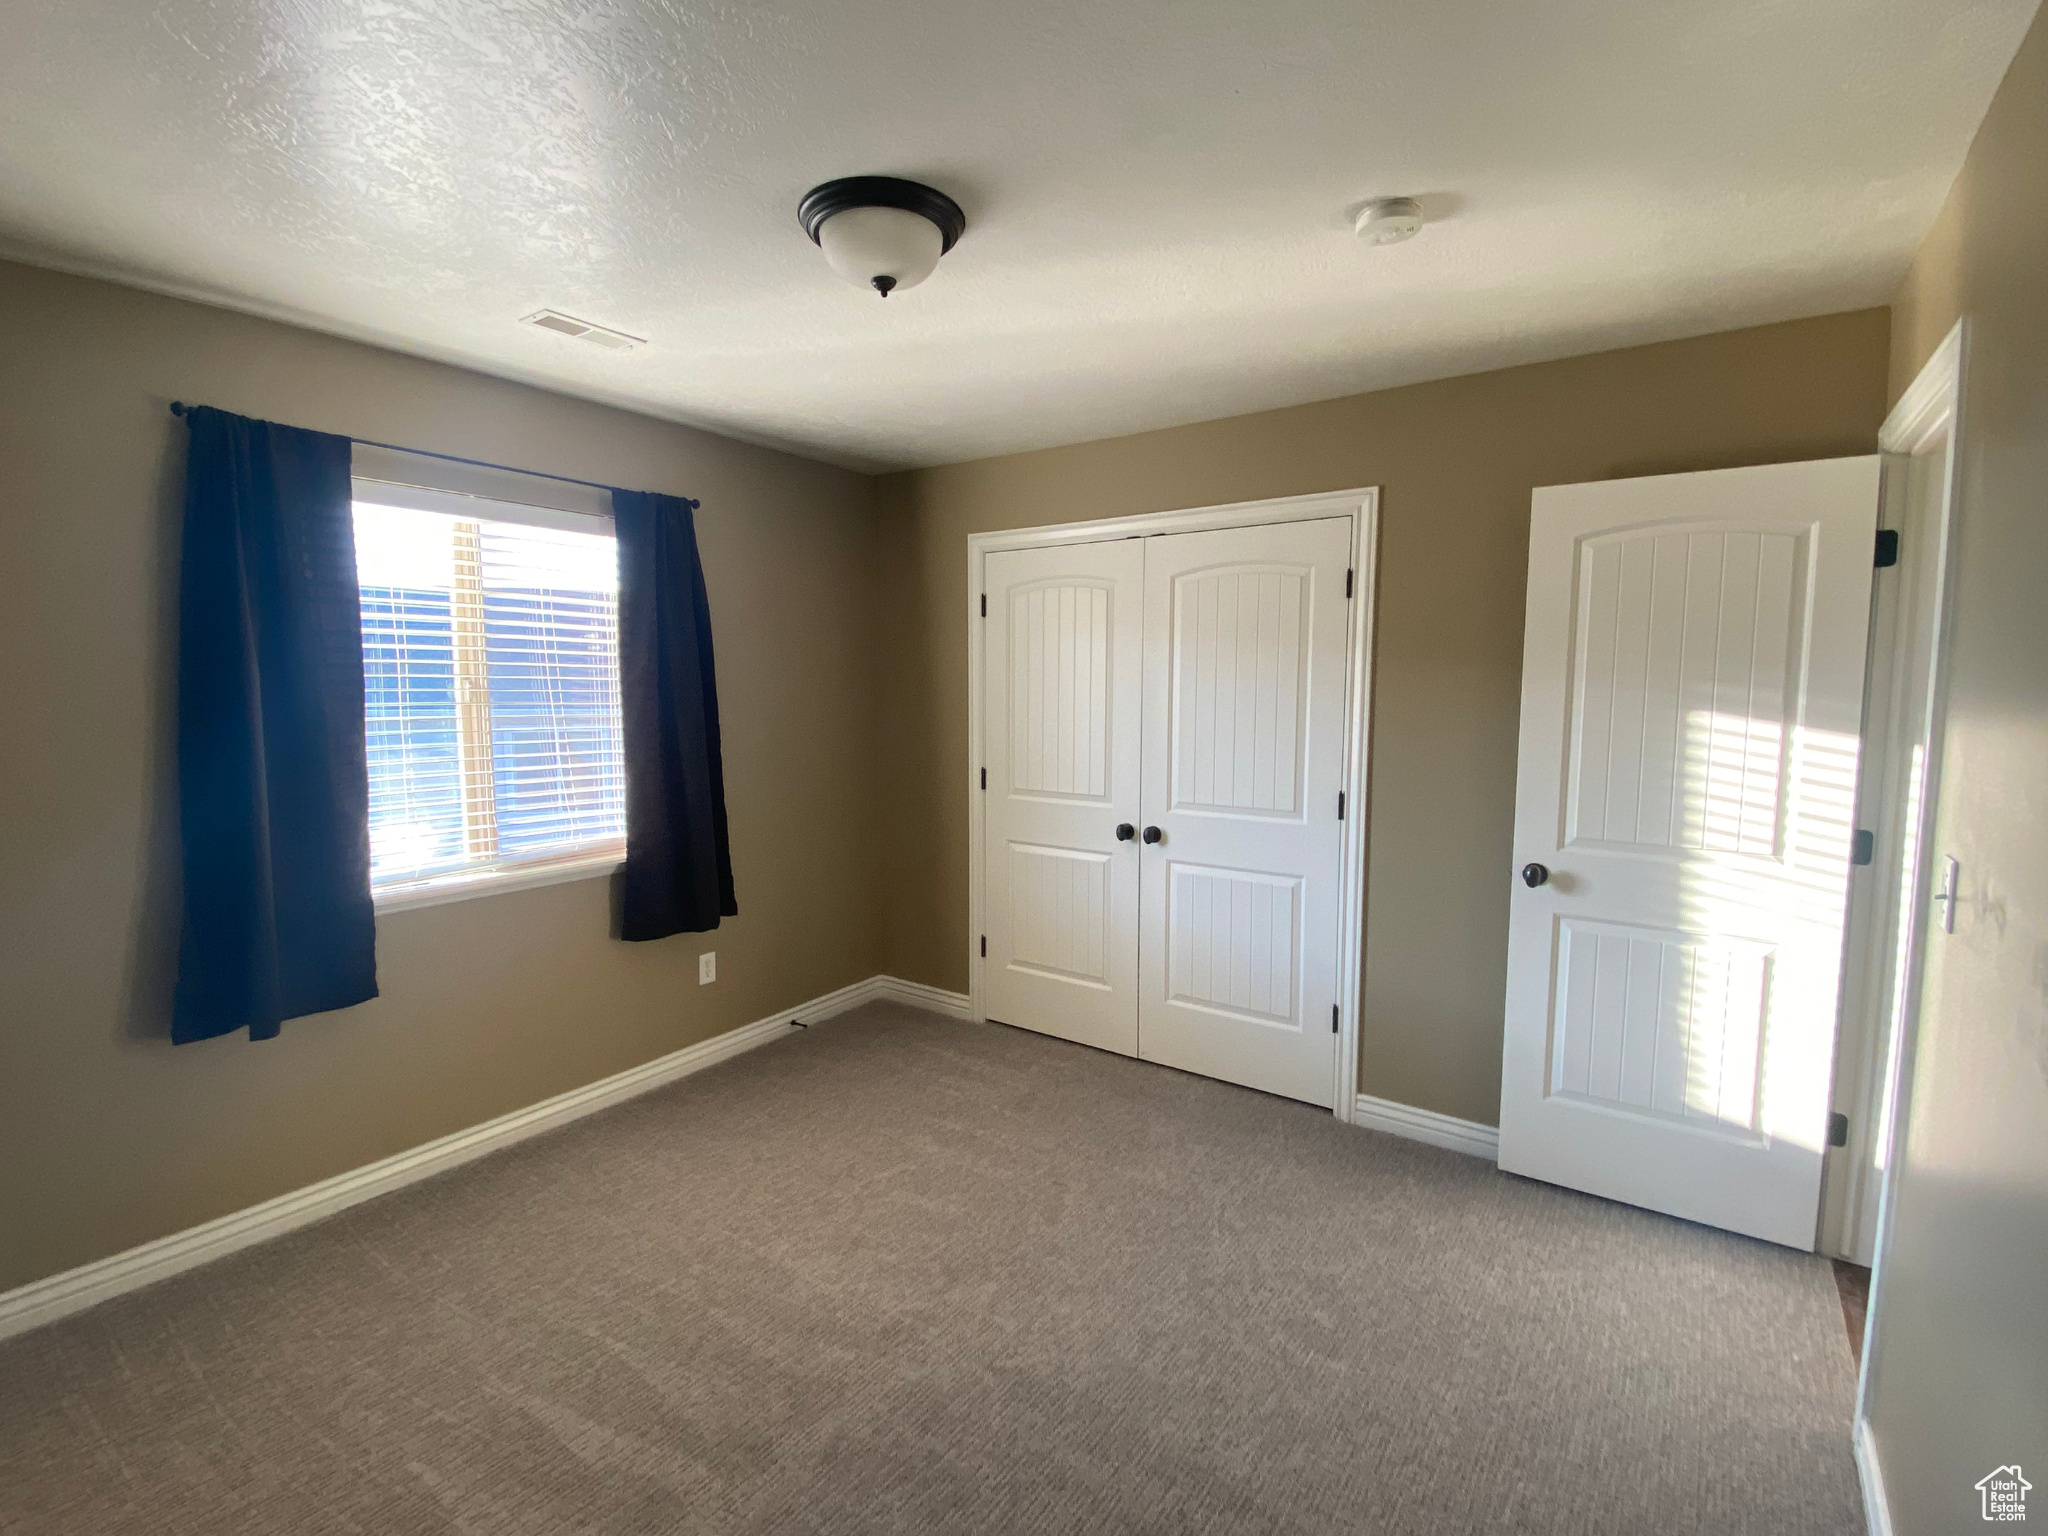 Unfurnished bedroom  with spacious closet and carpet